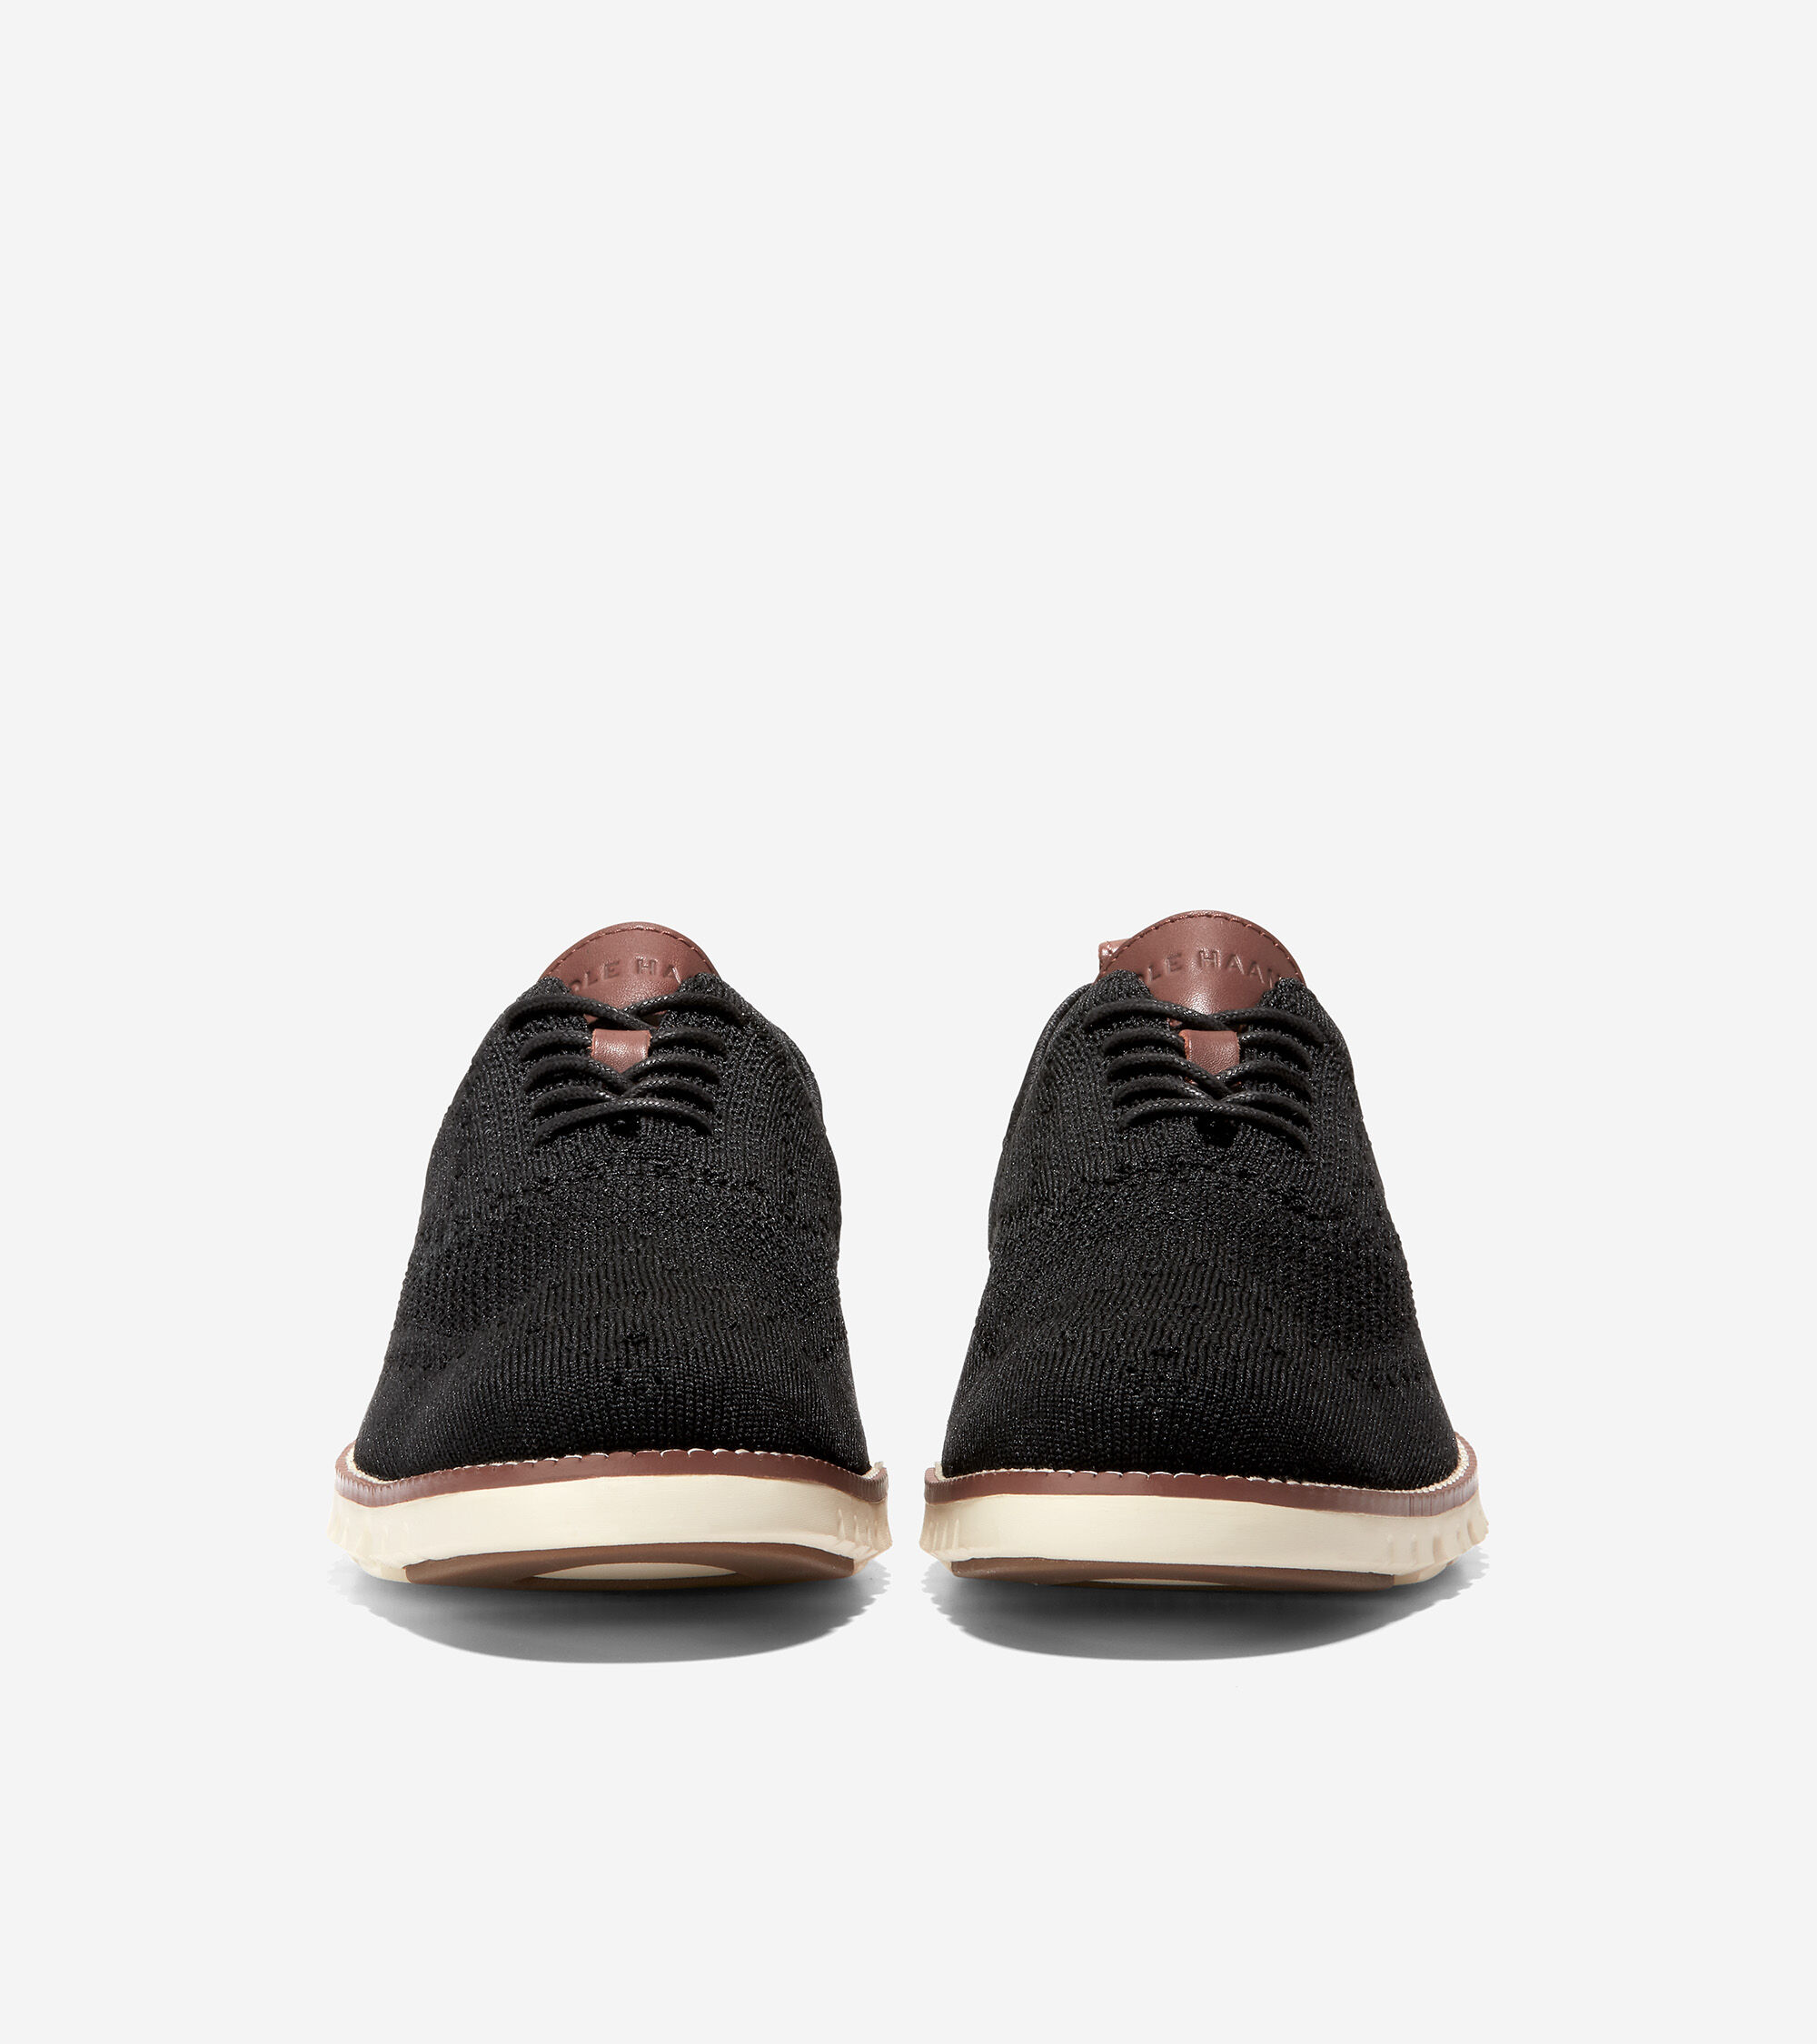 cleaning cole haan stitchlite